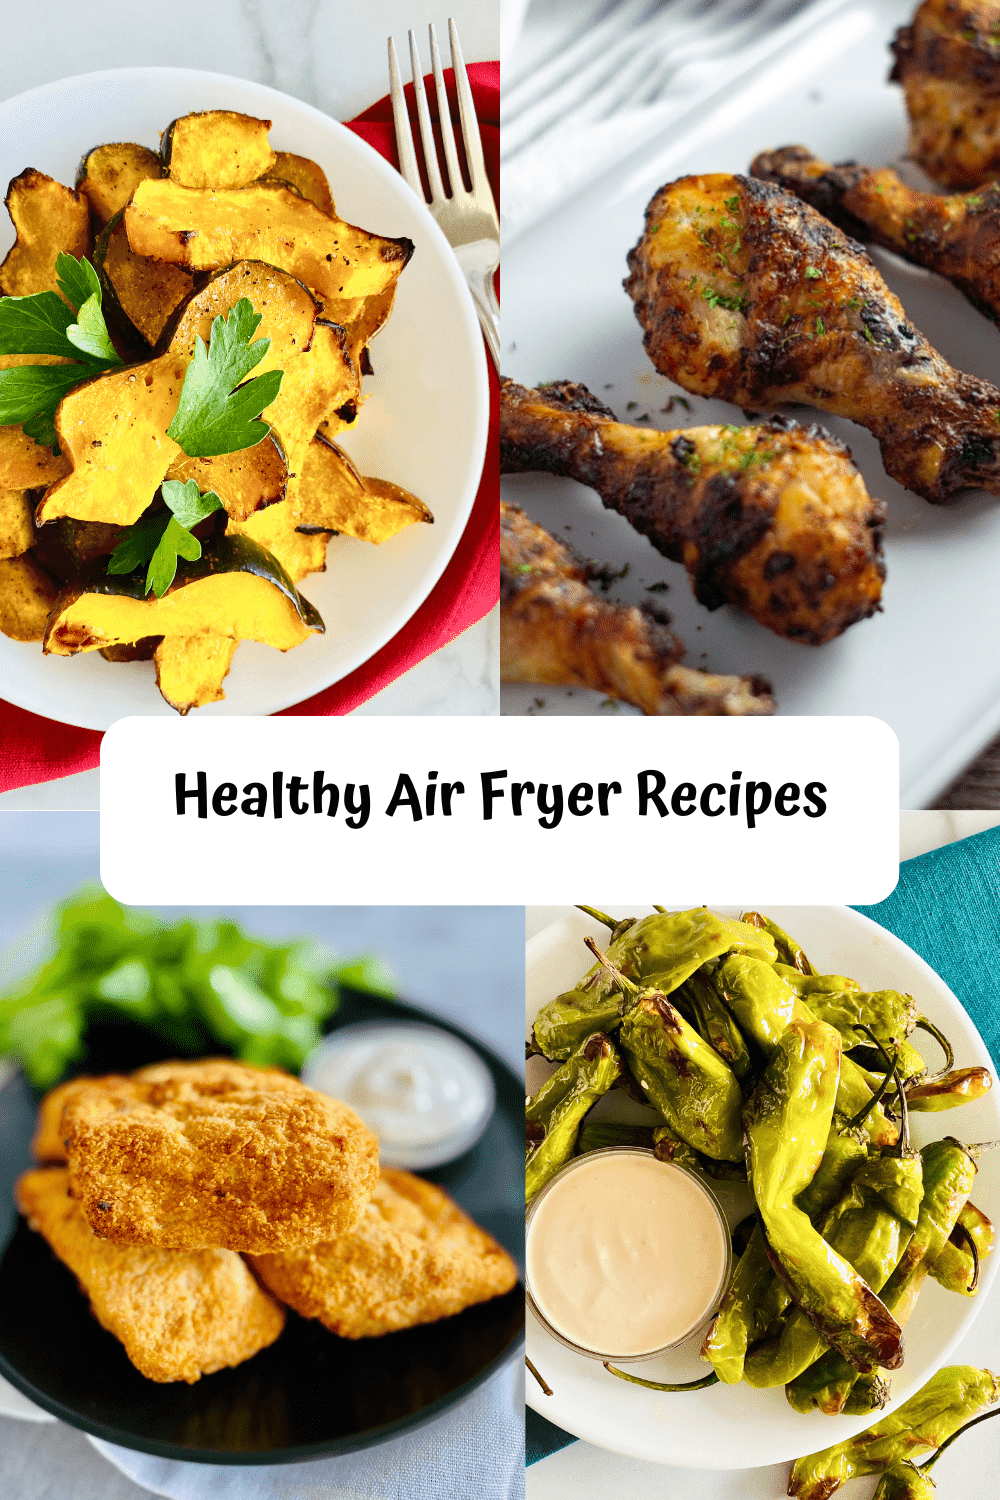 4 recipe images for acorn squash, chicken drumsticks, frozen fish, and shishito peppers cooked in the air fryer.